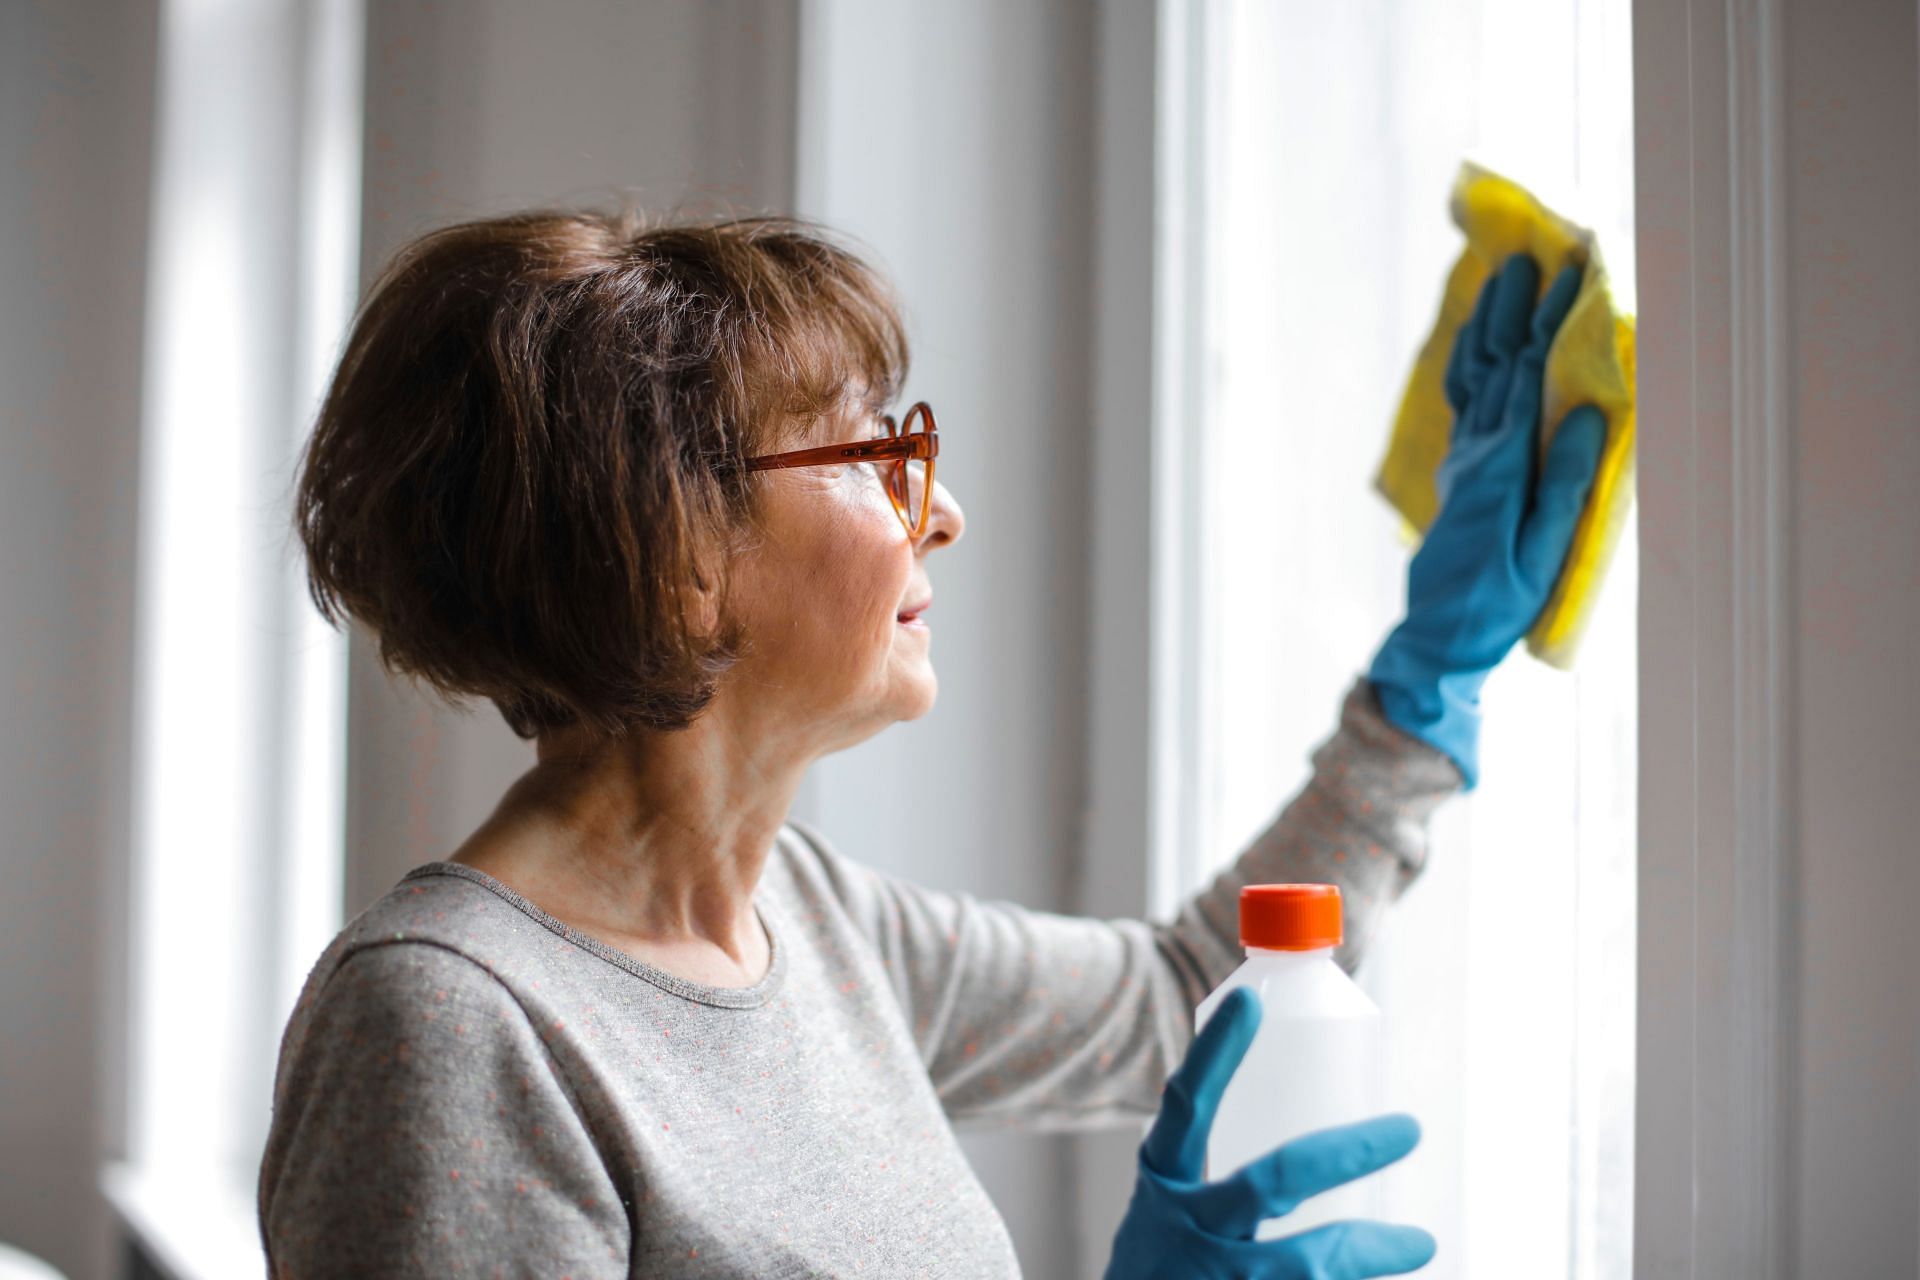 Decluttering is a great way to reduce stress in seniors. (Image via Pexels/ Andrea Piacquadio)